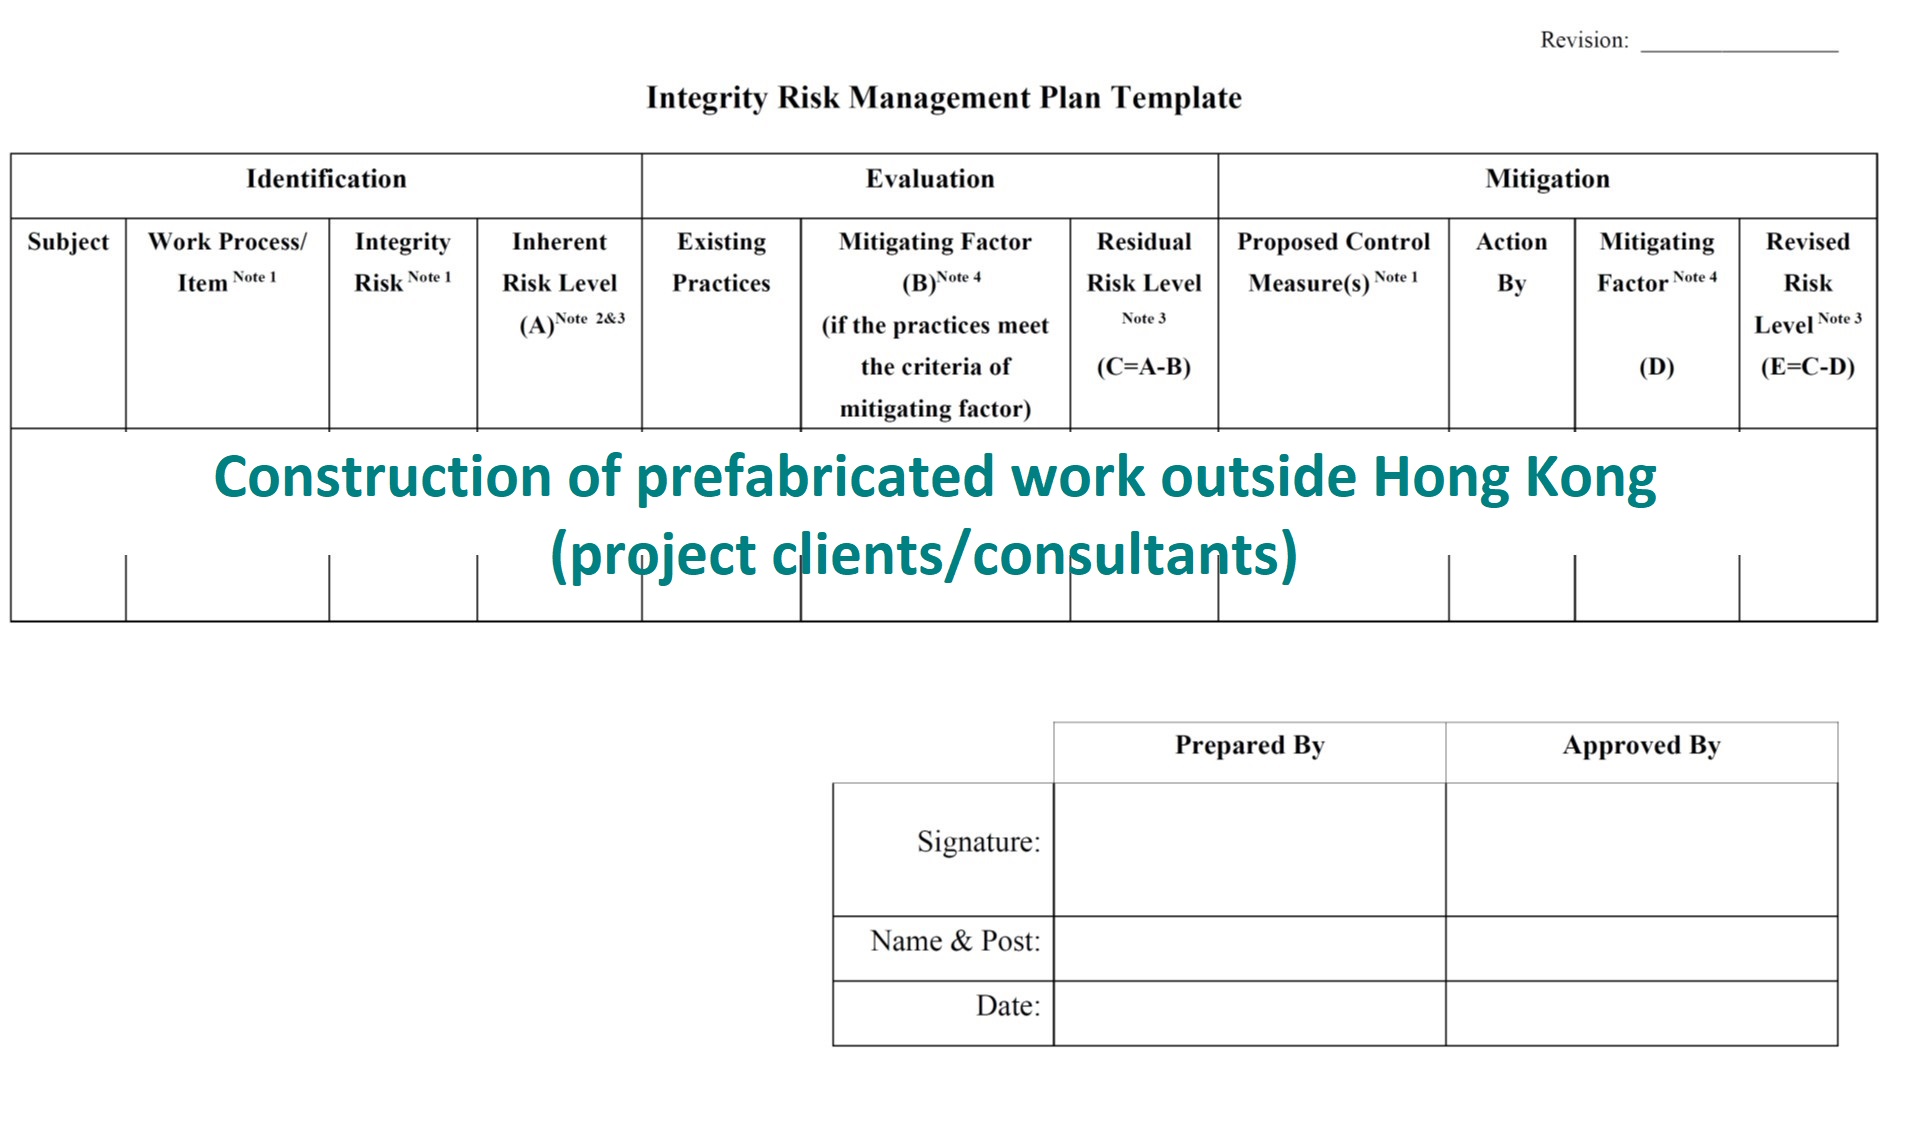 Integrity Risk Management on Construction of Prefabricated Work outside Hong Kong (For Project Clients / Consultants)